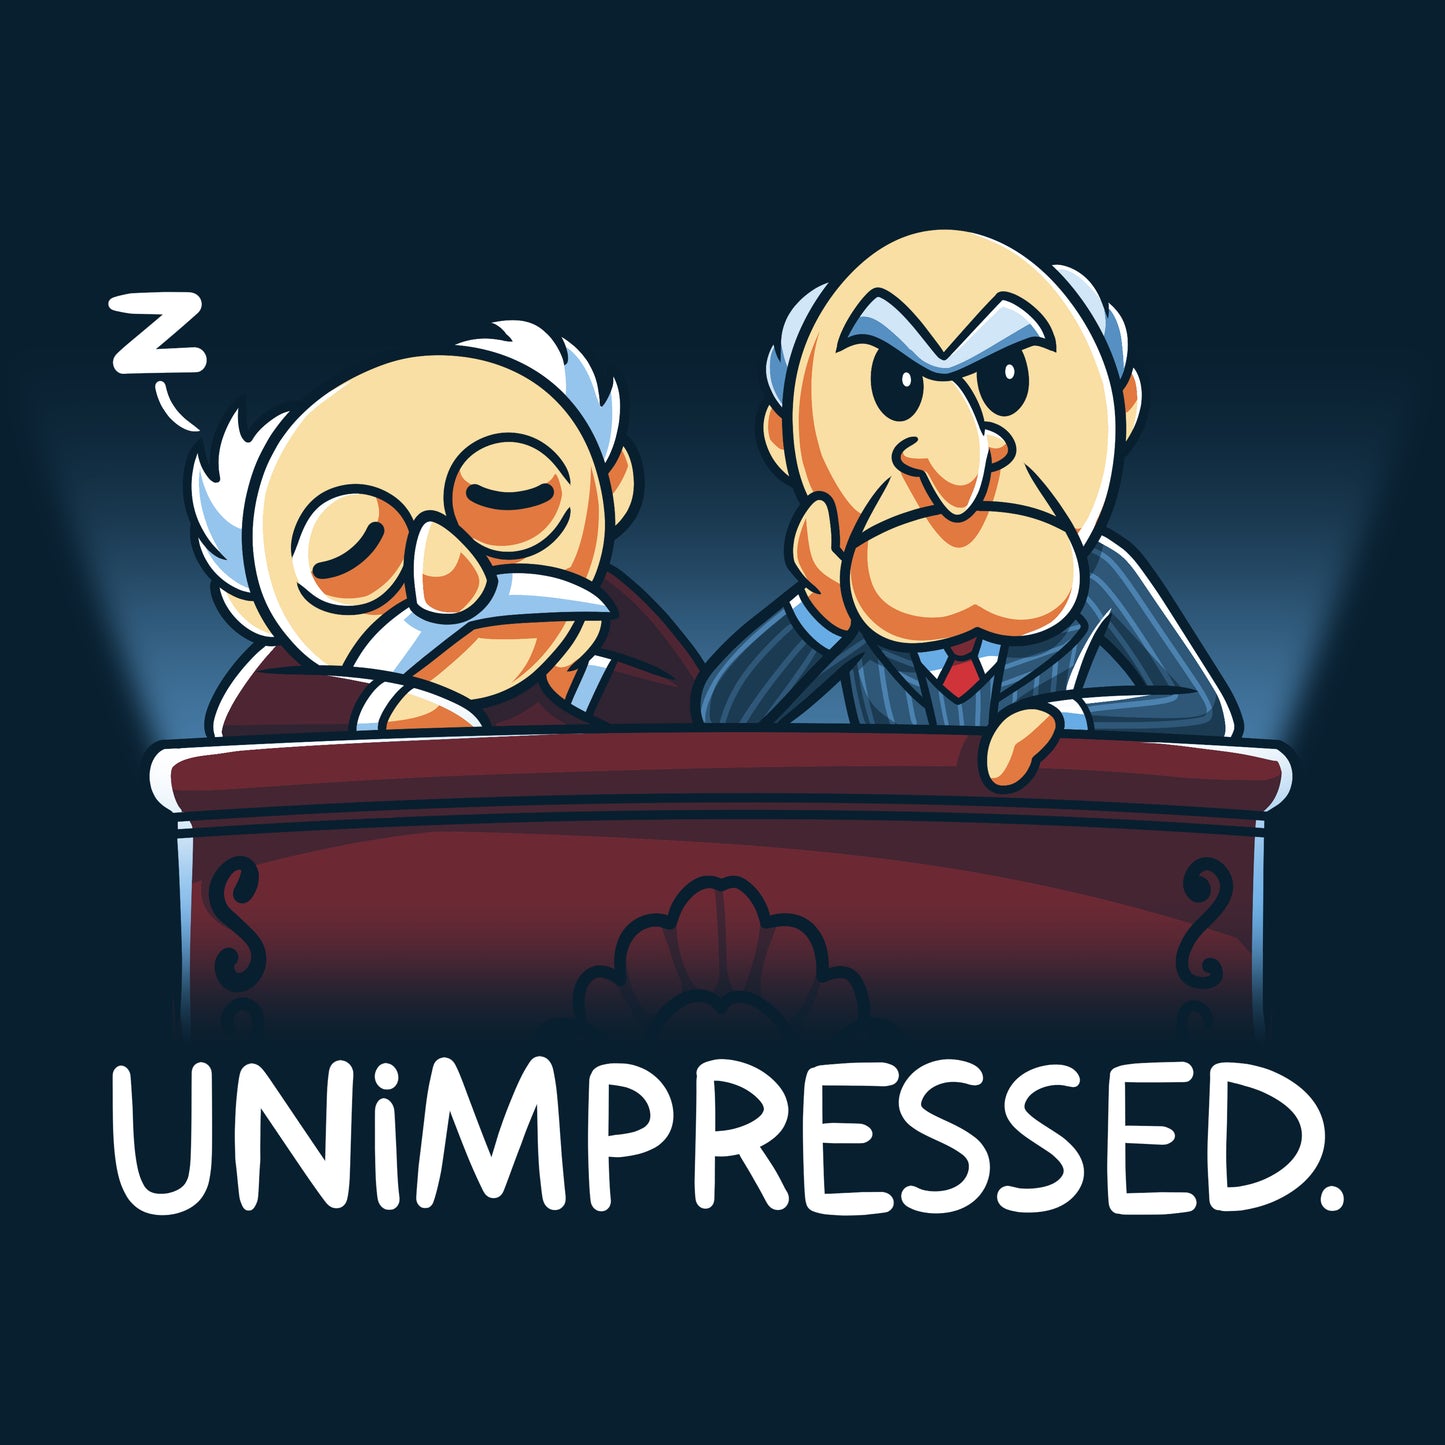 Officially licensed Statler and Waldorf: Unimpressed T-shirt by Muppets.